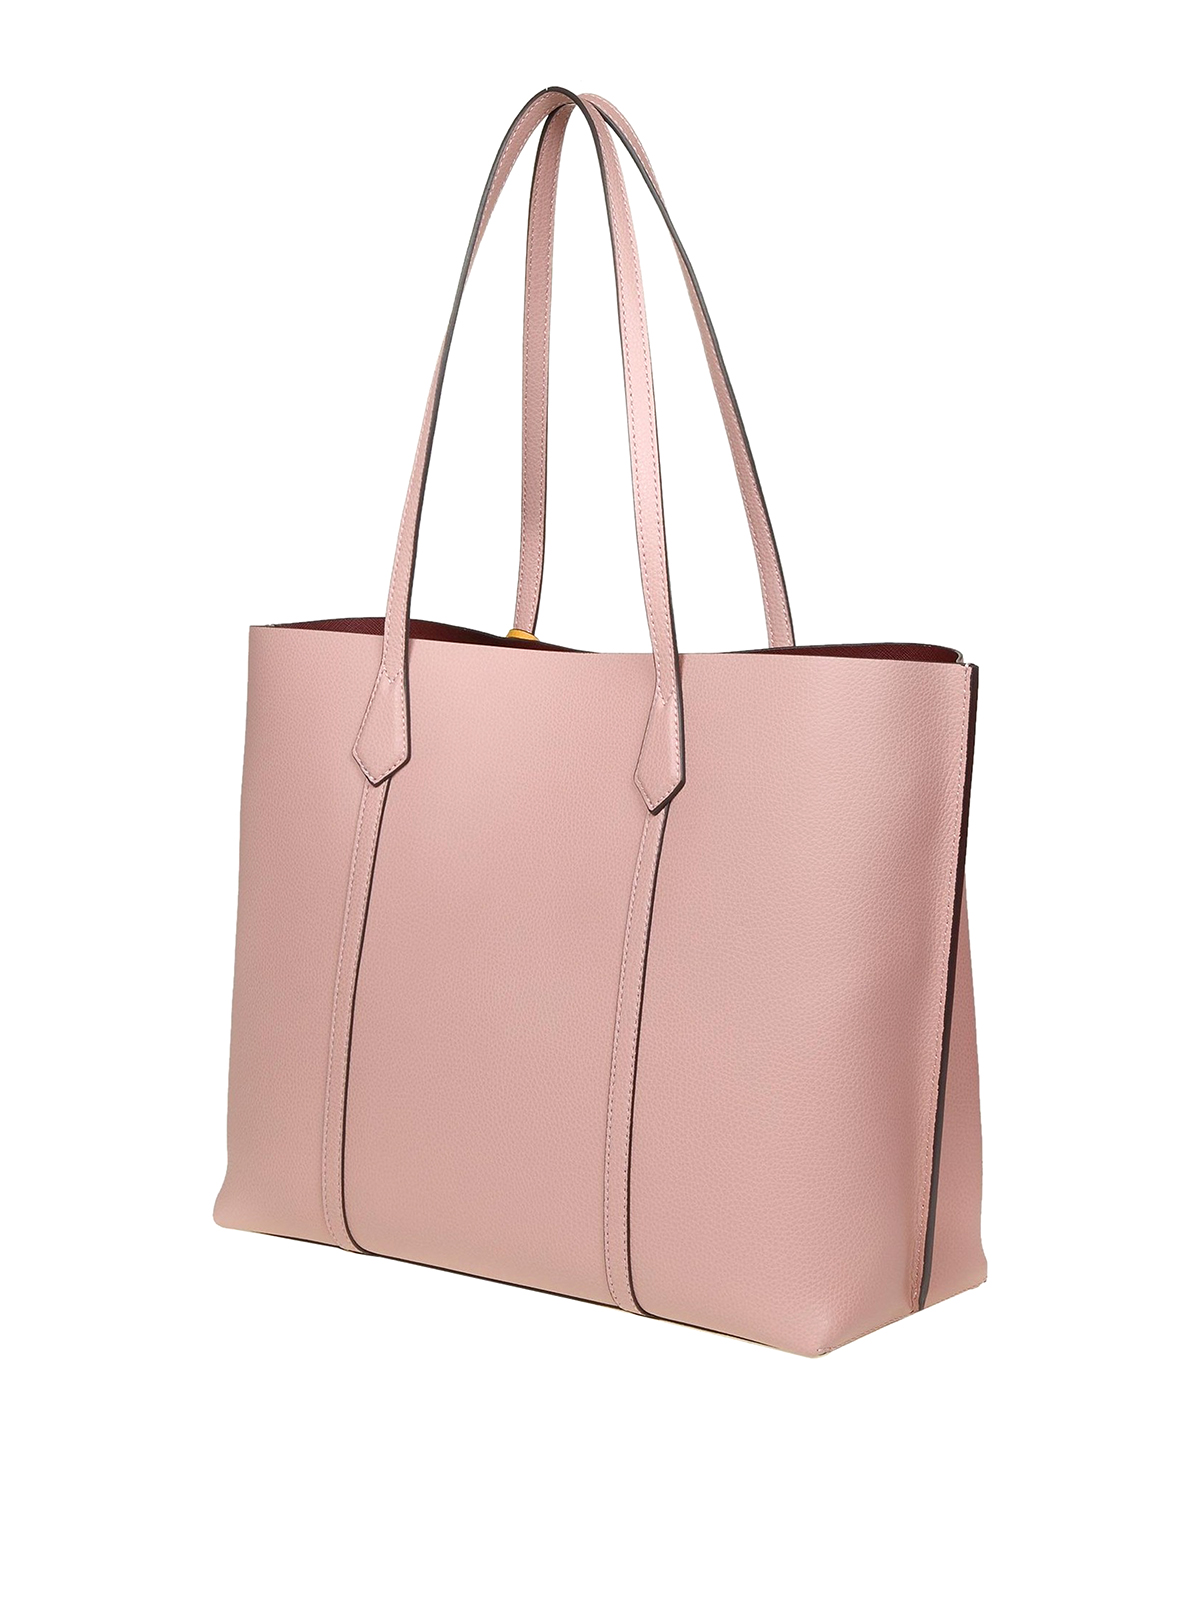 Tory Burch Perry Tote Bags